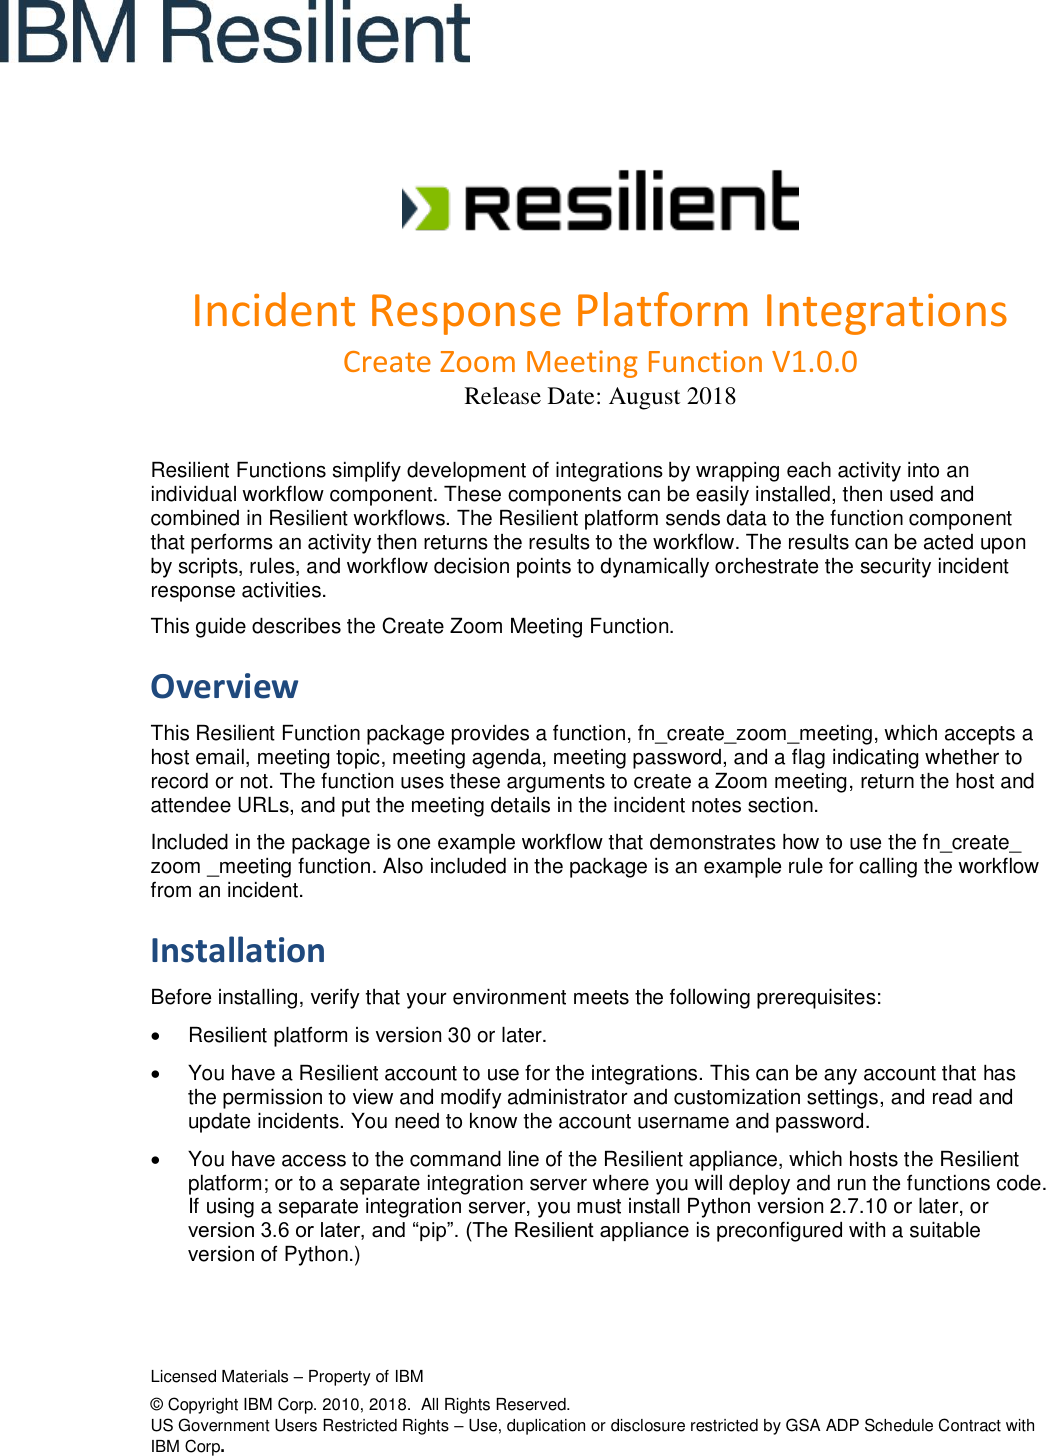 Page 1 of 8 - Resilient IRP Integrations Create Zoom Meeting Function Guide